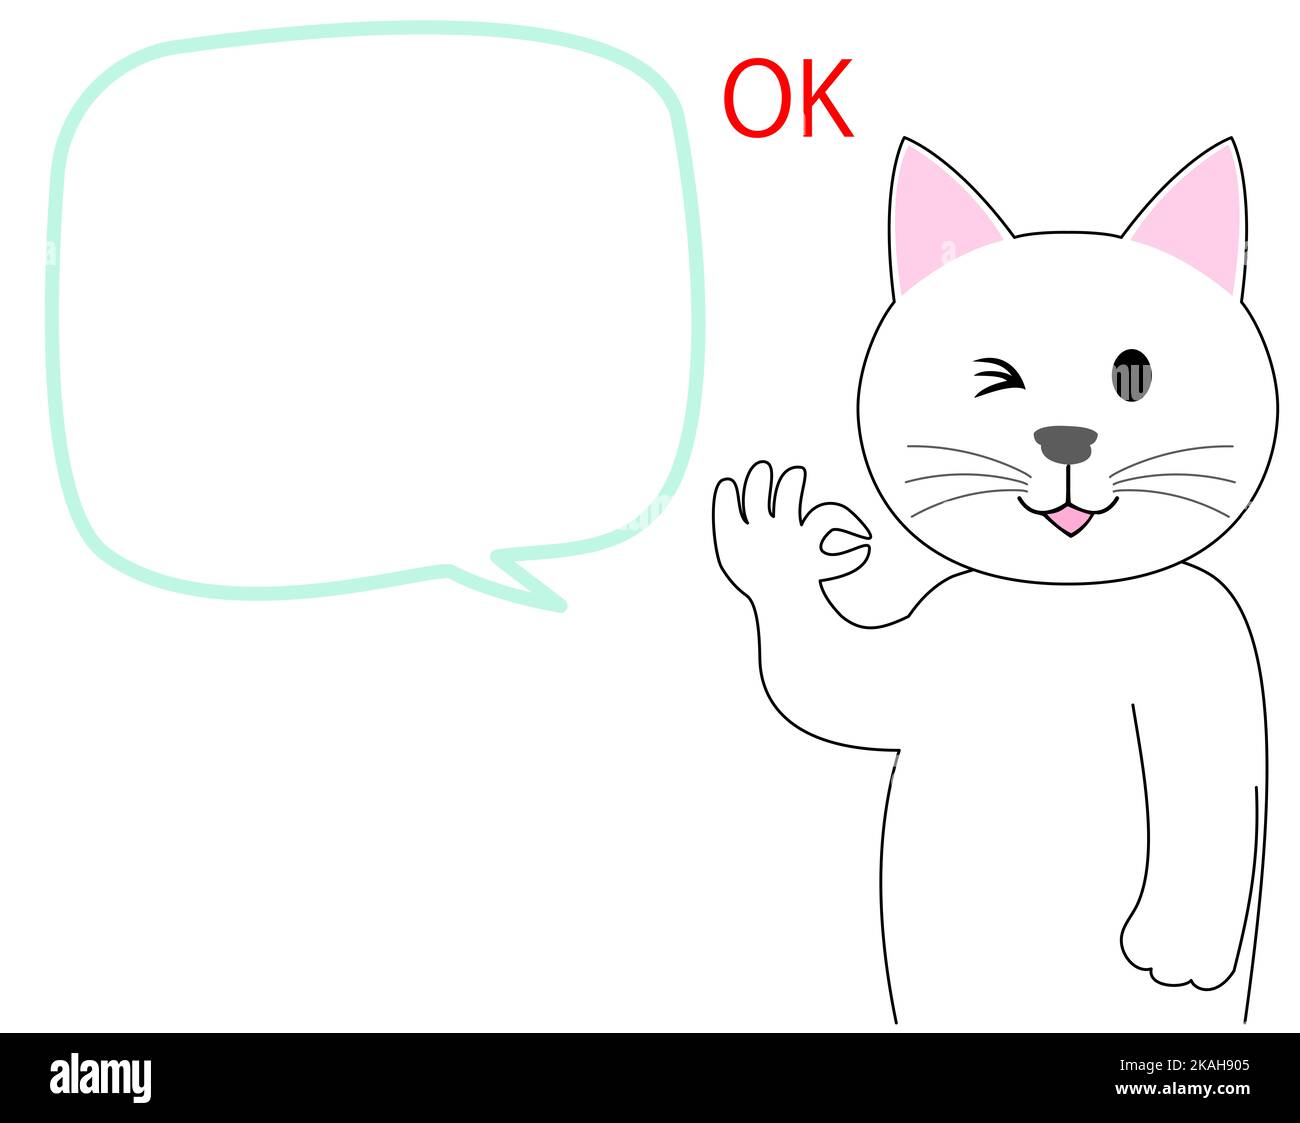 A White Kitten gesturing with fingers and speech balloon Stock Photo